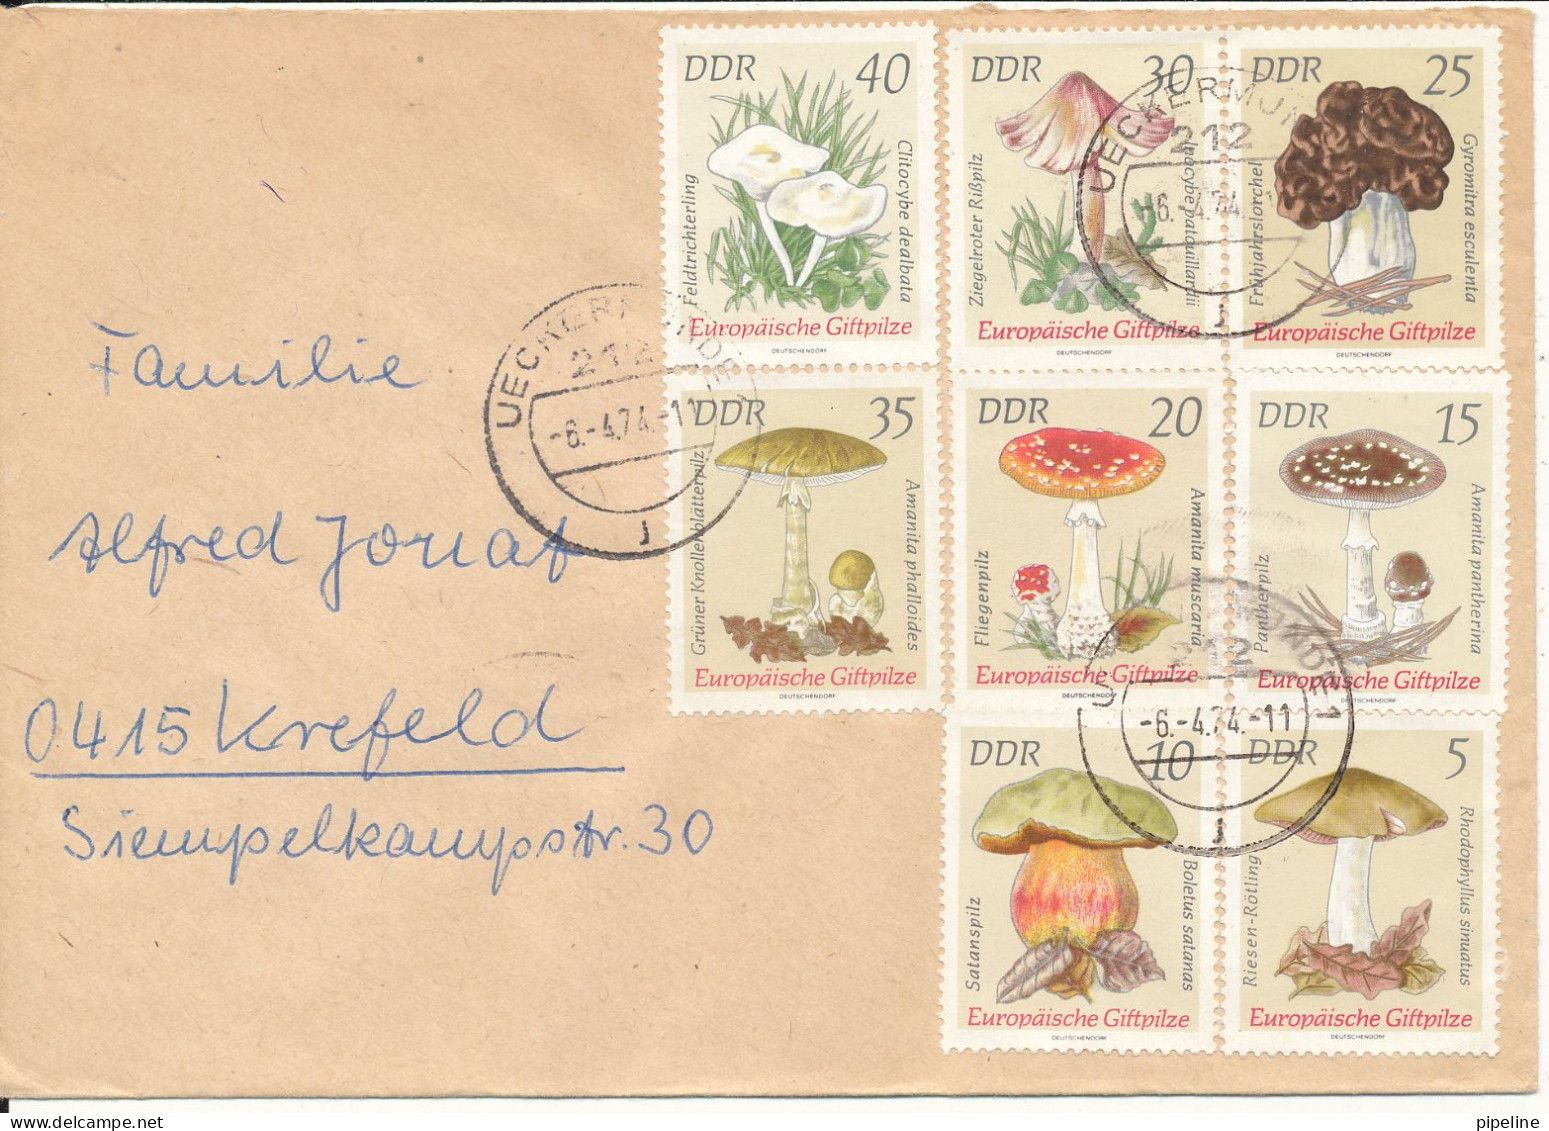 Germany DDR Registered Cover Ueckermünde 6-4-1974 With Minisheet And Stamps Also On The Backside Of The Cover - Briefe U. Dokumente